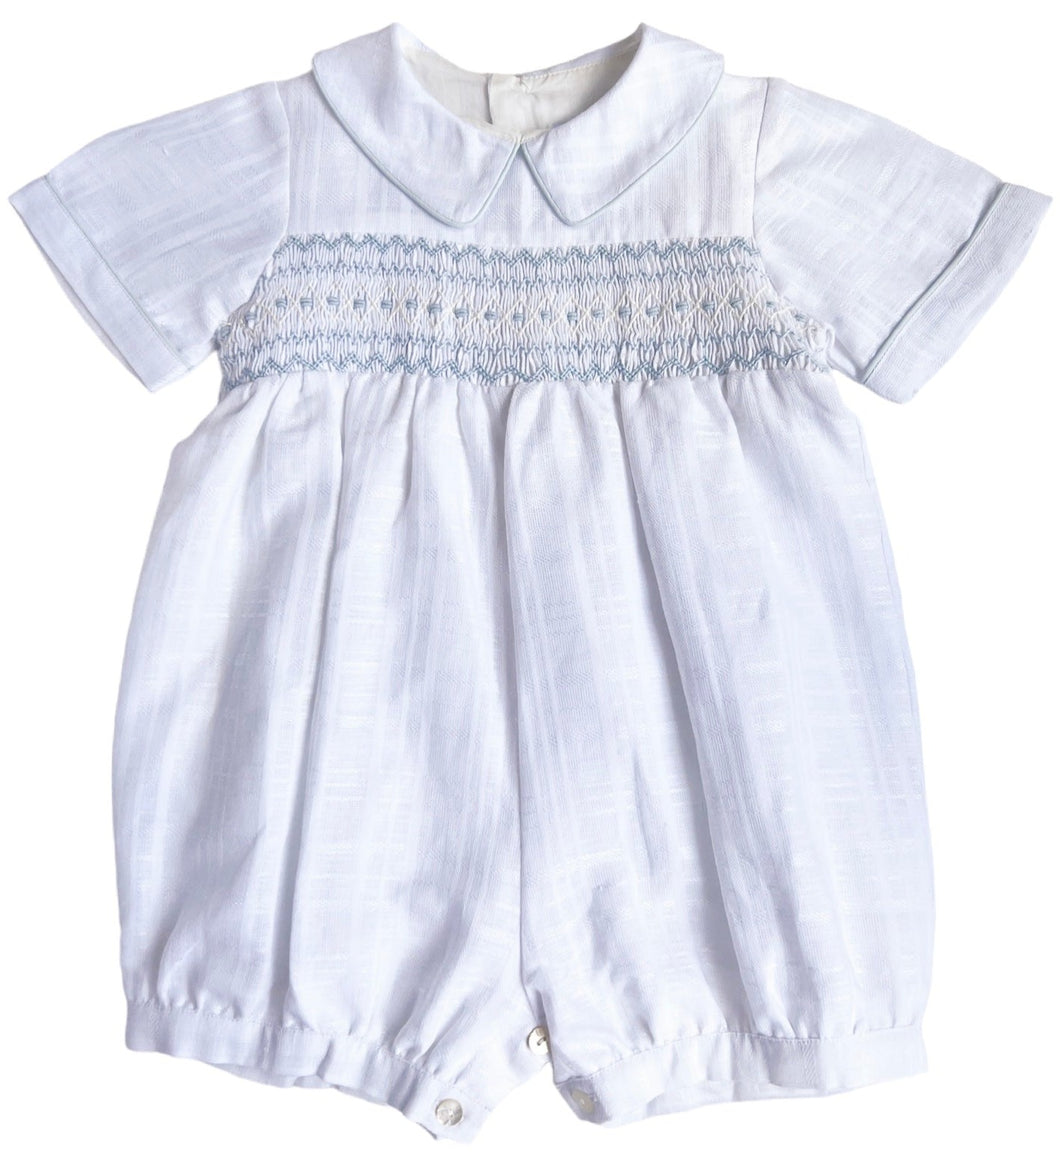 The Smocked Shortie - Periwinkle White Linen